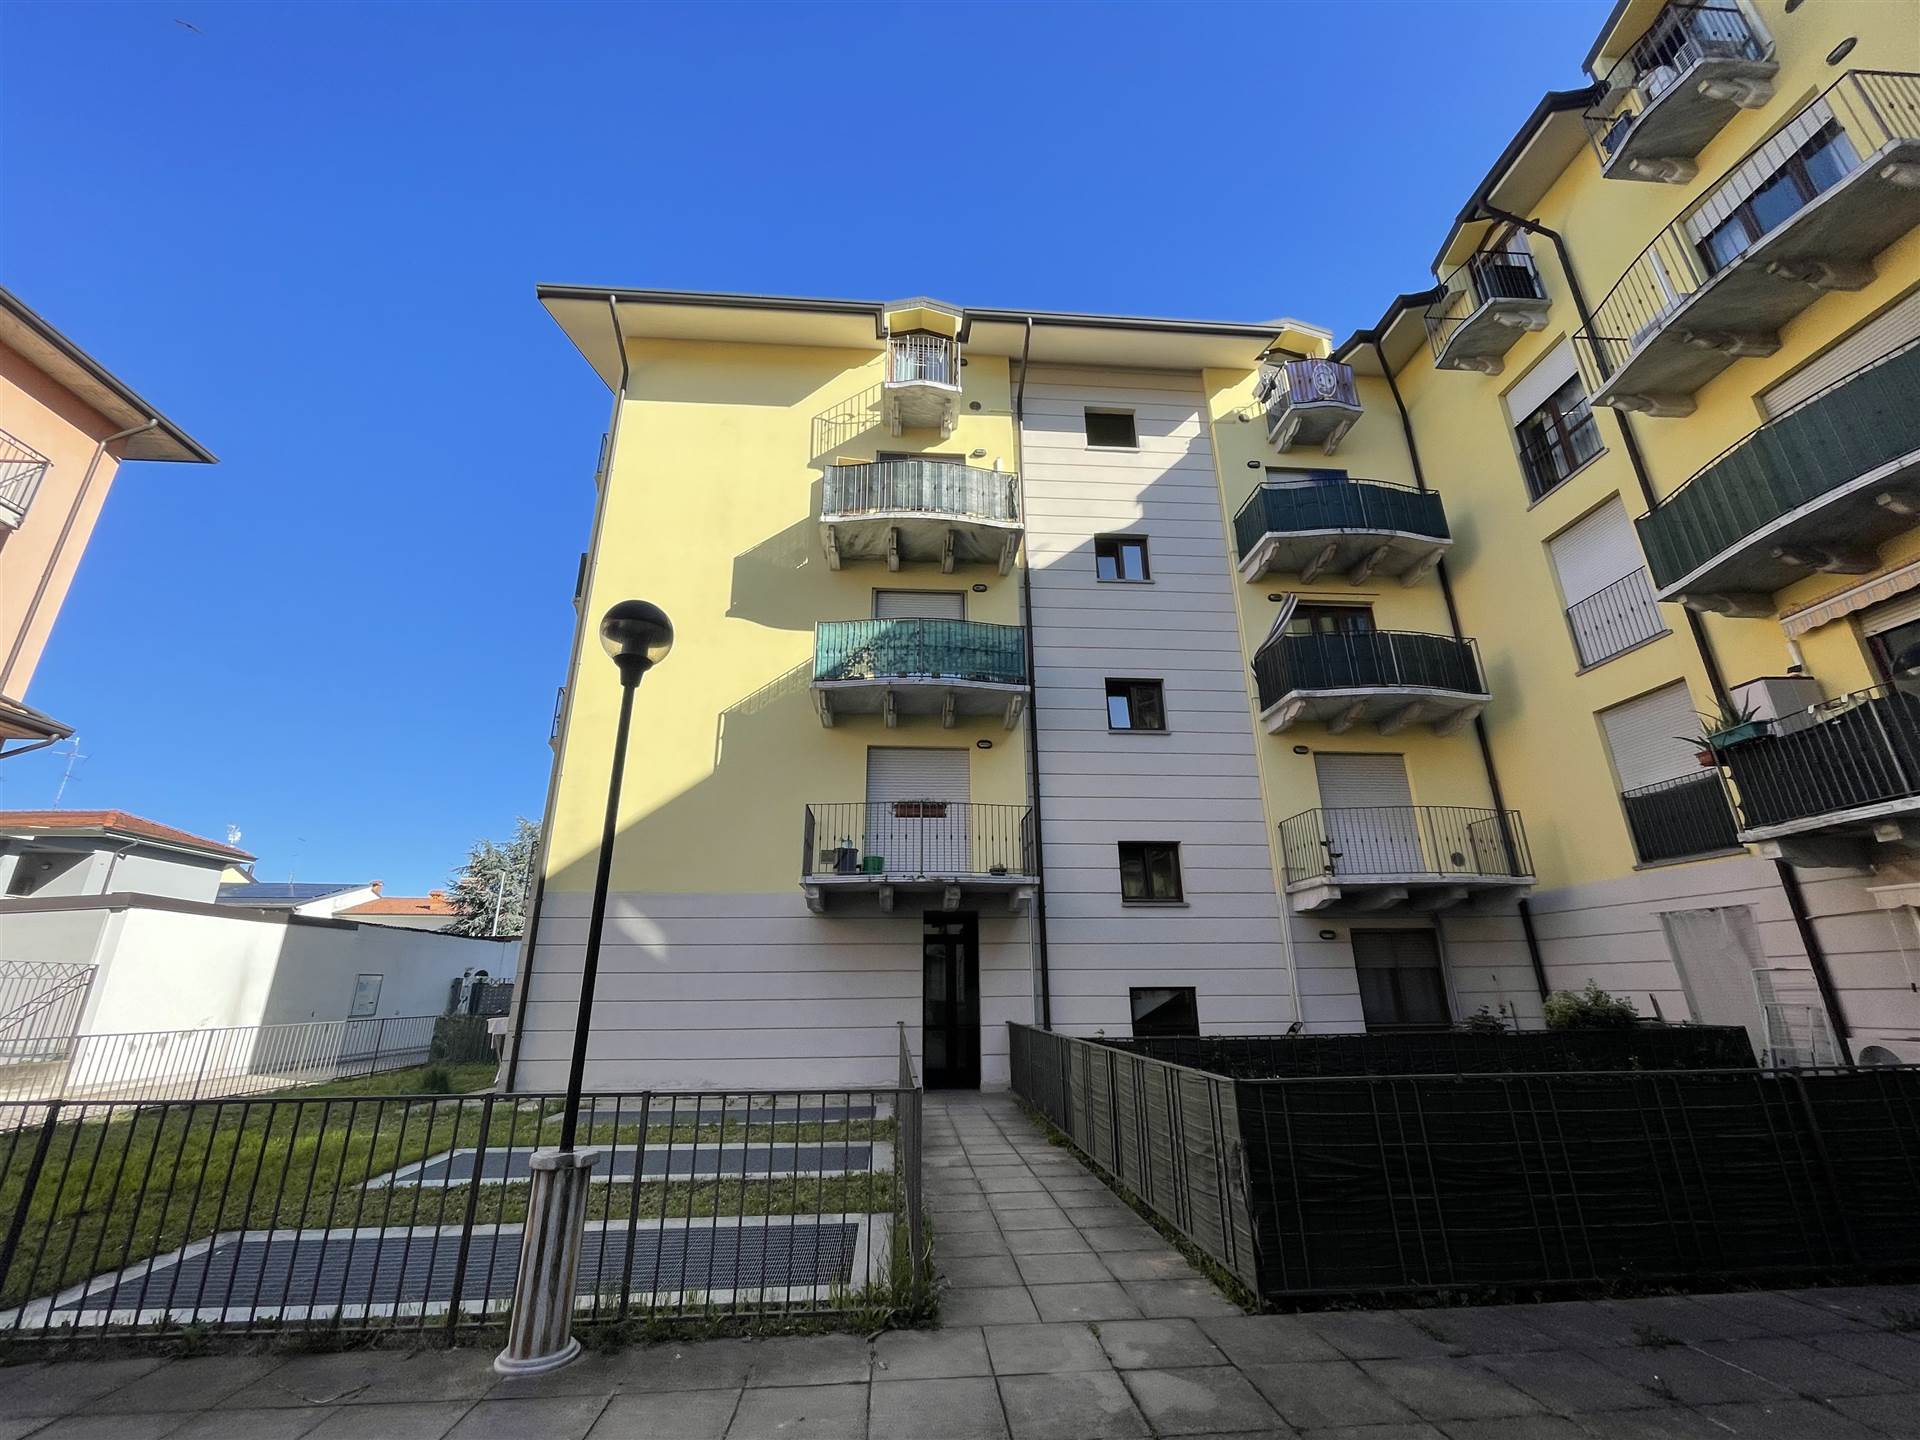 CARAVAGGIO, Apartment for sale of 59 Sq. mt., Excellent Condition, Heating Individual heating system, Energetic class: E, Epi: 244,56 kwh/m2 year, 